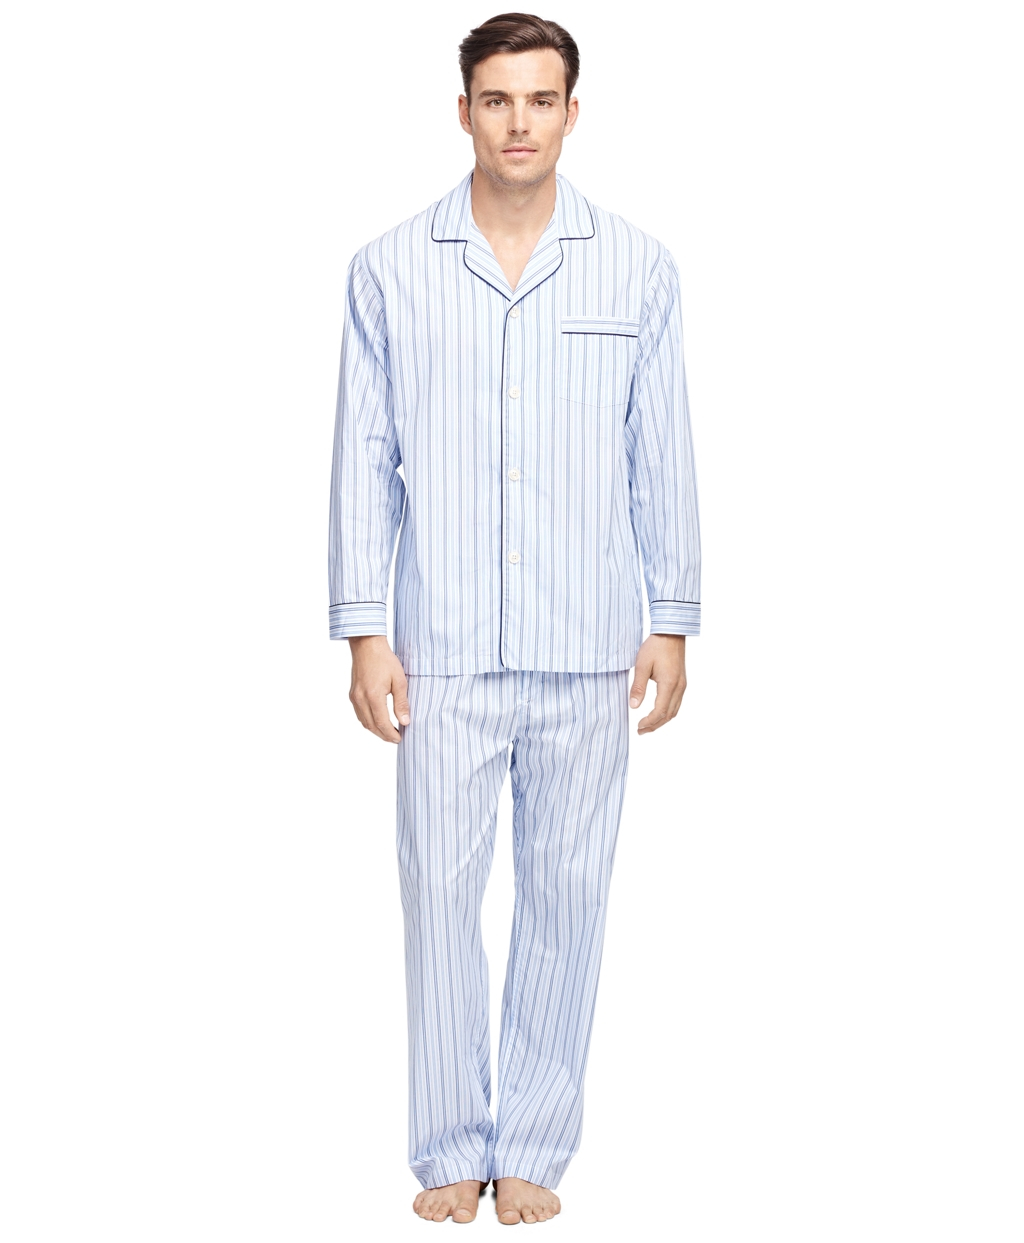 Lyst - Brooks Brothers Alternating Hairline Bold Stripe Pajamas in Blue ...